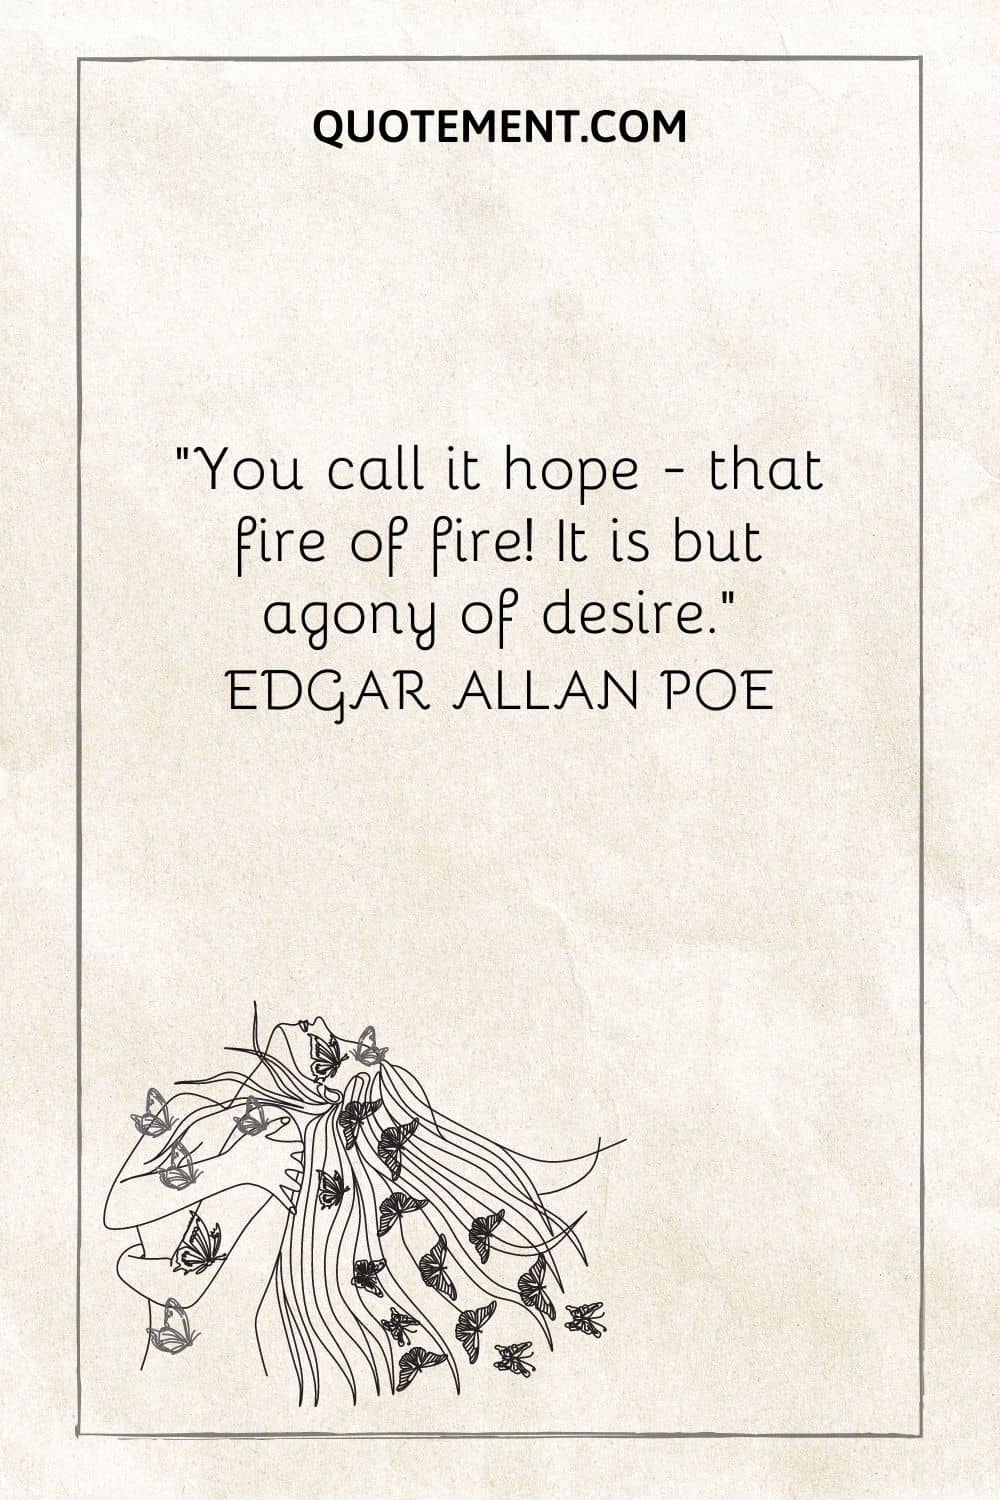 “You call it hope - that fire of fire! It is but agony of desire.” — Edgar Allan Poe